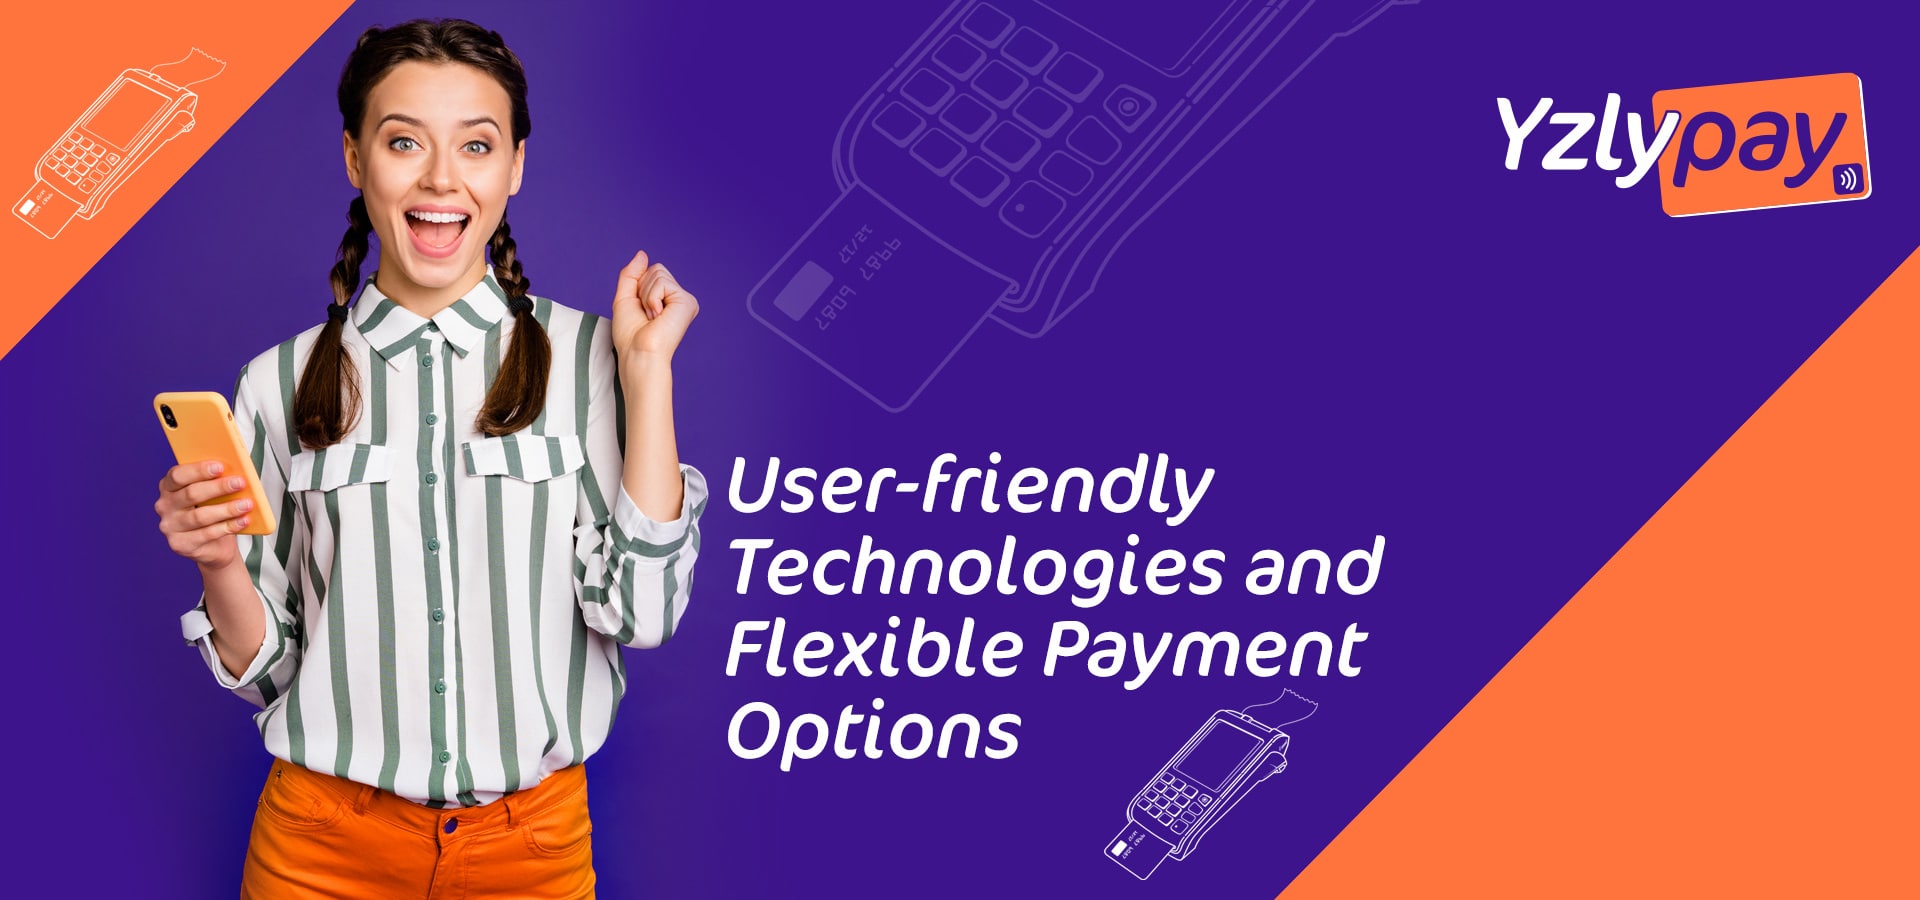 yzly pay accessible technologies and flexible payment methods with our optimized payment solutions, easily pay and get paid